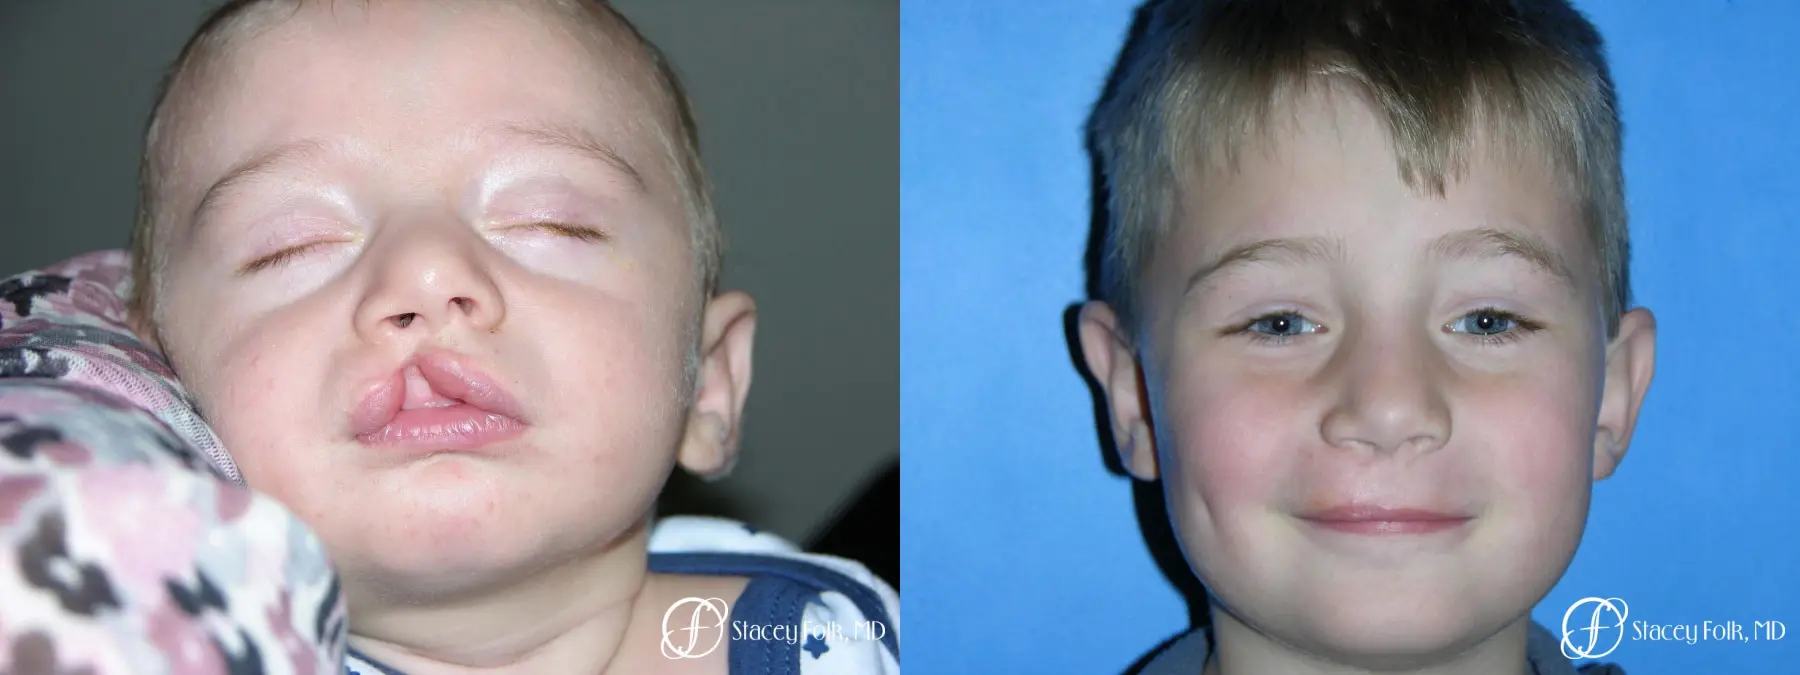 Denver Cleft Lip and Palate Repair 3304 - Before and After